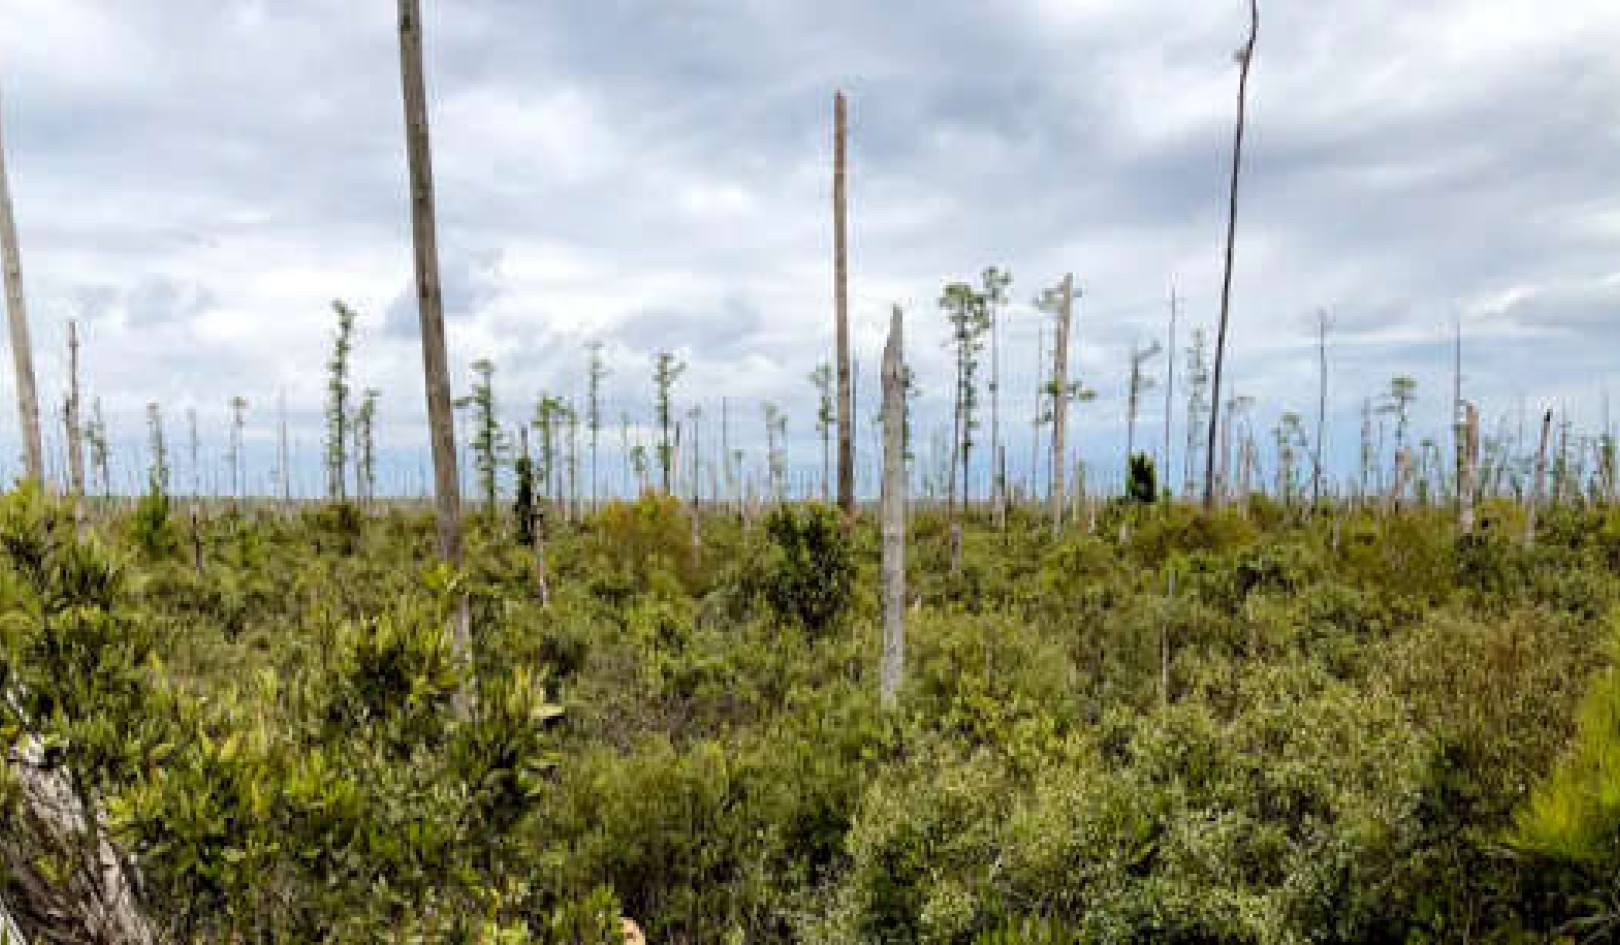 Sea Level Rise Is Killing Trees Along The Us Atlantic Coast, Creating Ghost Forests That Are Visible From Space